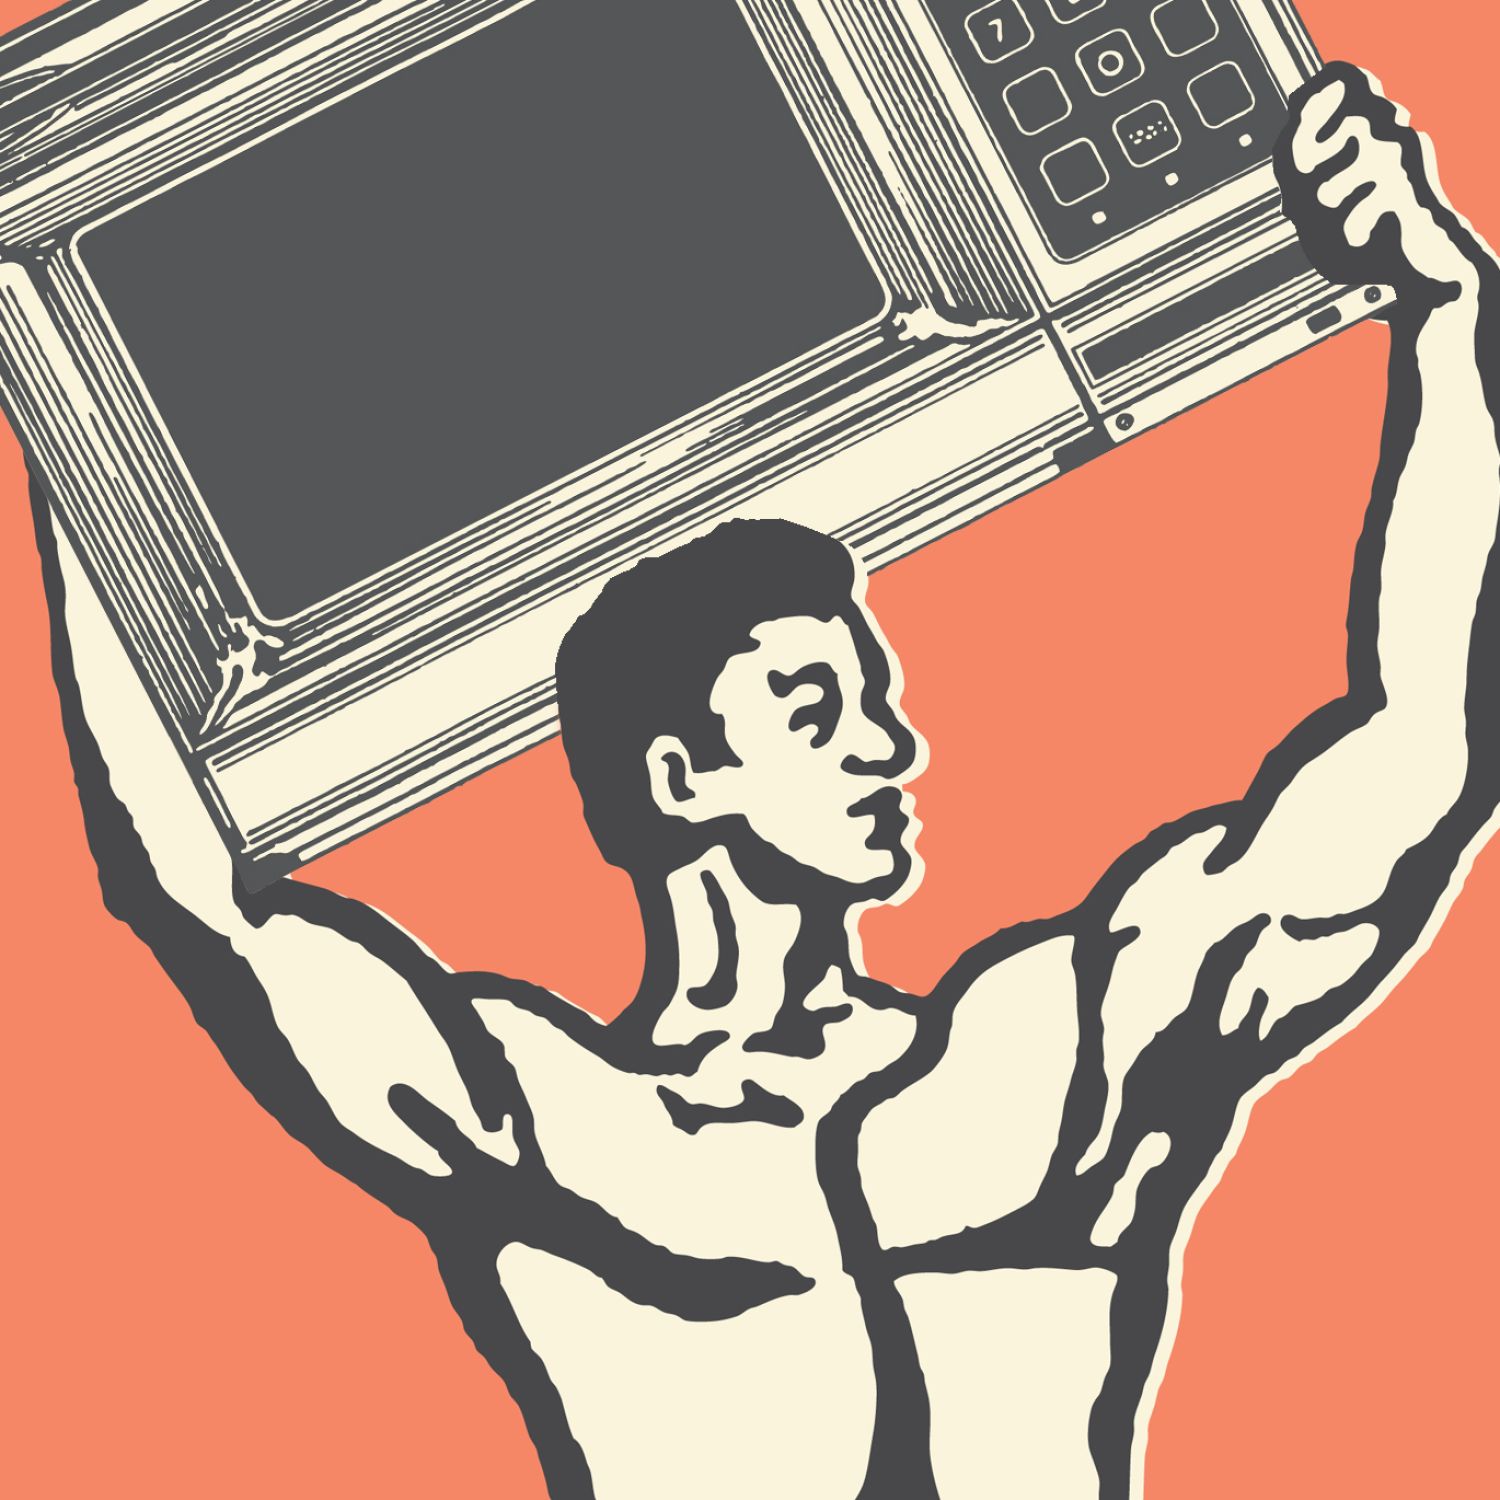 Illustration of strongman holding microwave above his head